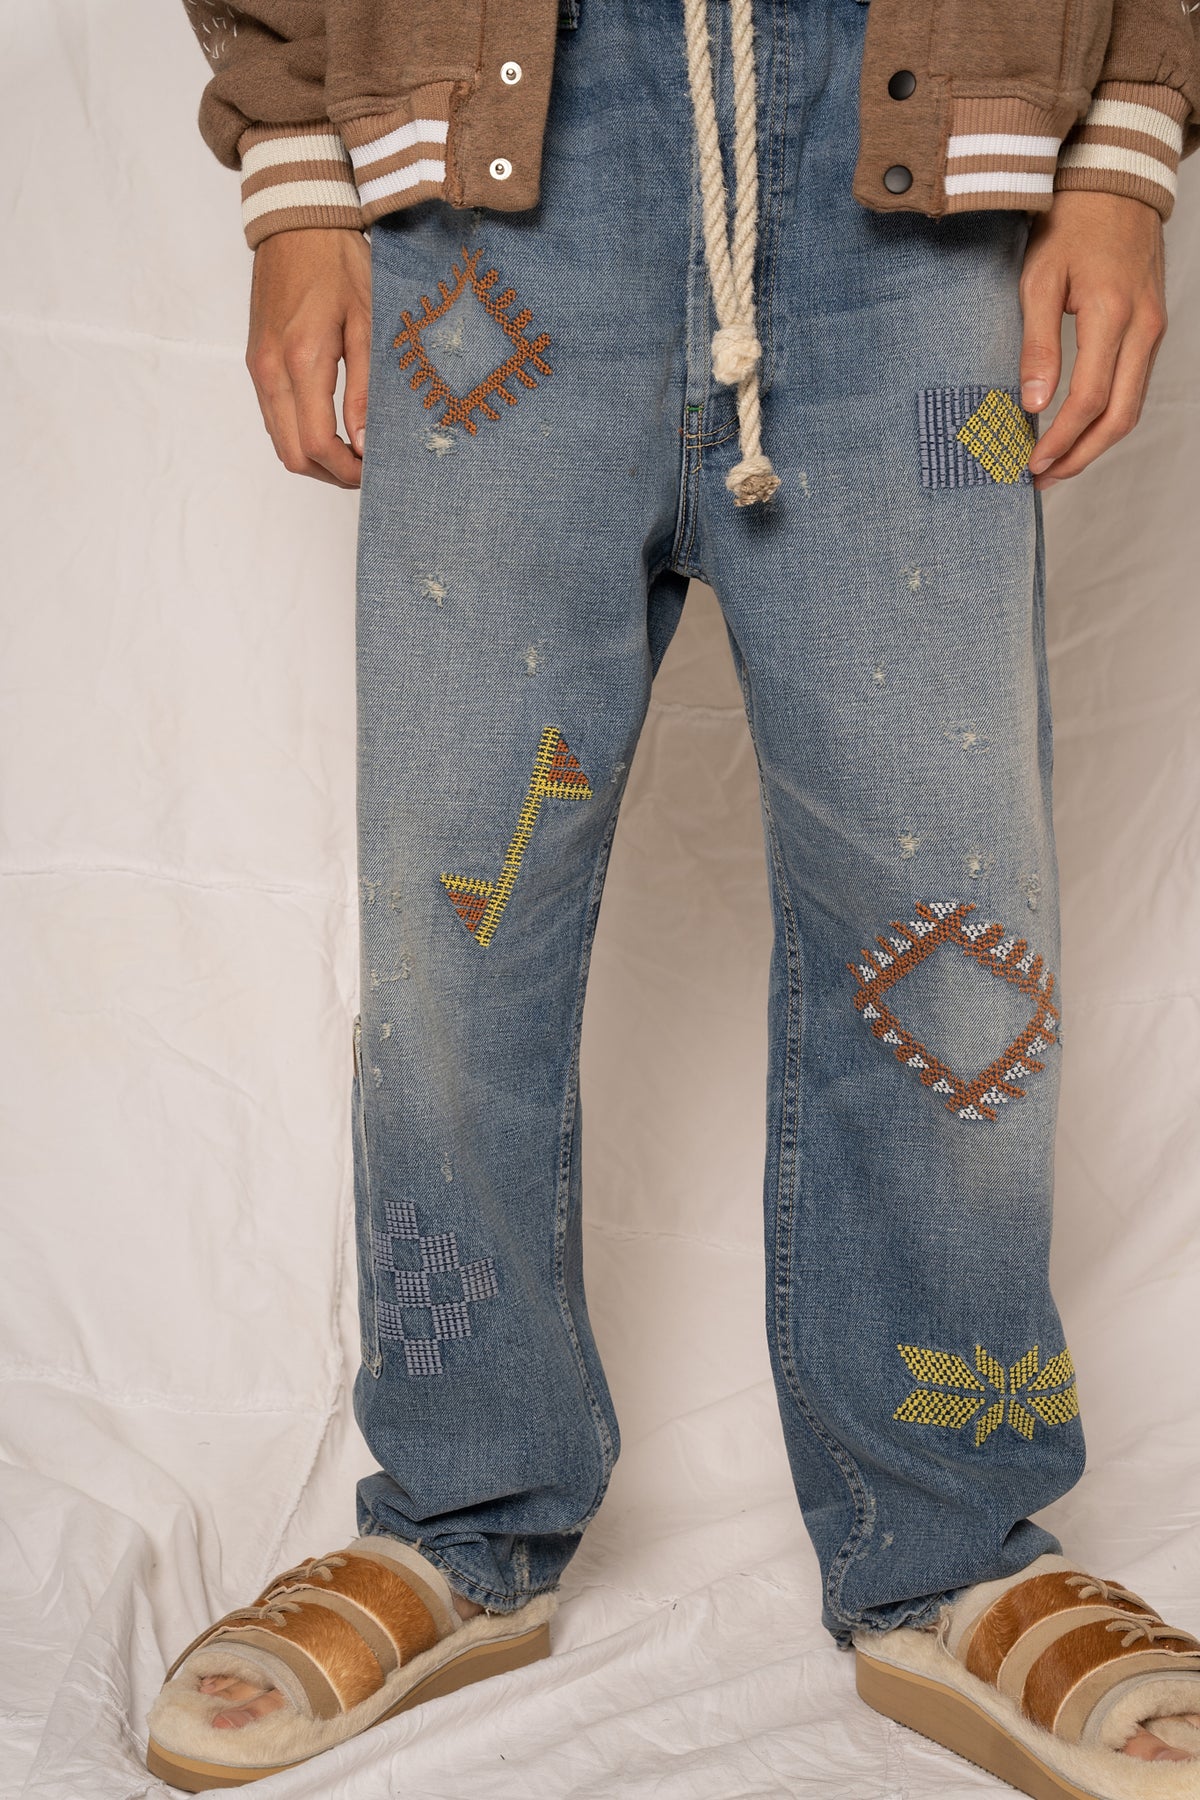 DR. COLLECTORS Embroidered Japanese Denim in Sunfaded Blue S